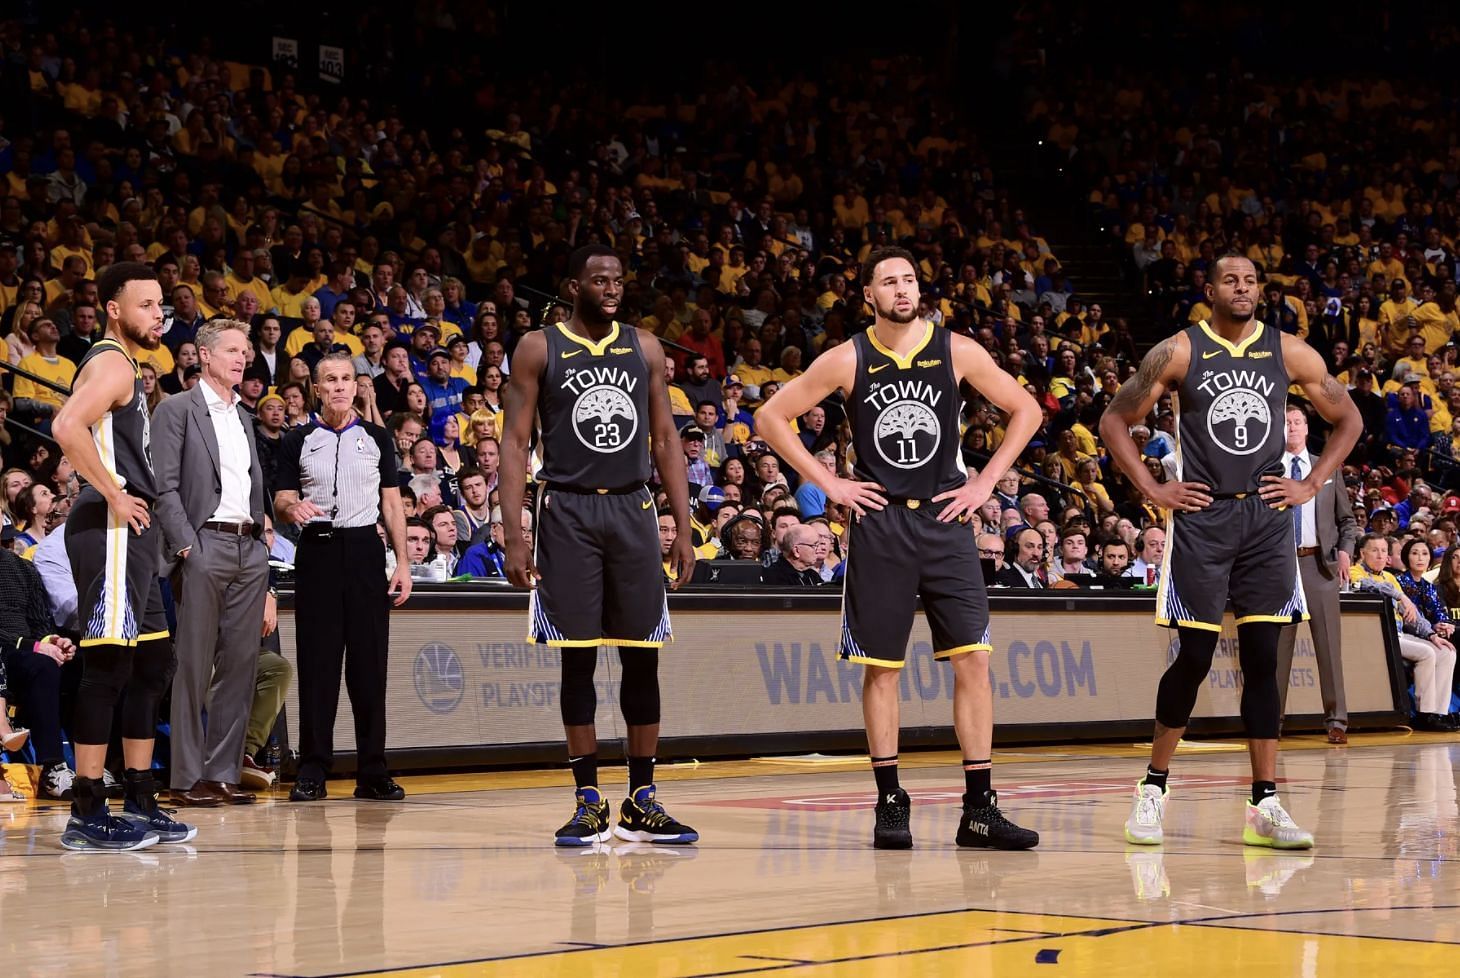 Stephen Curry, Klay Thompson, Draymond Green and Andre Iguodala of the Golden State Warriors